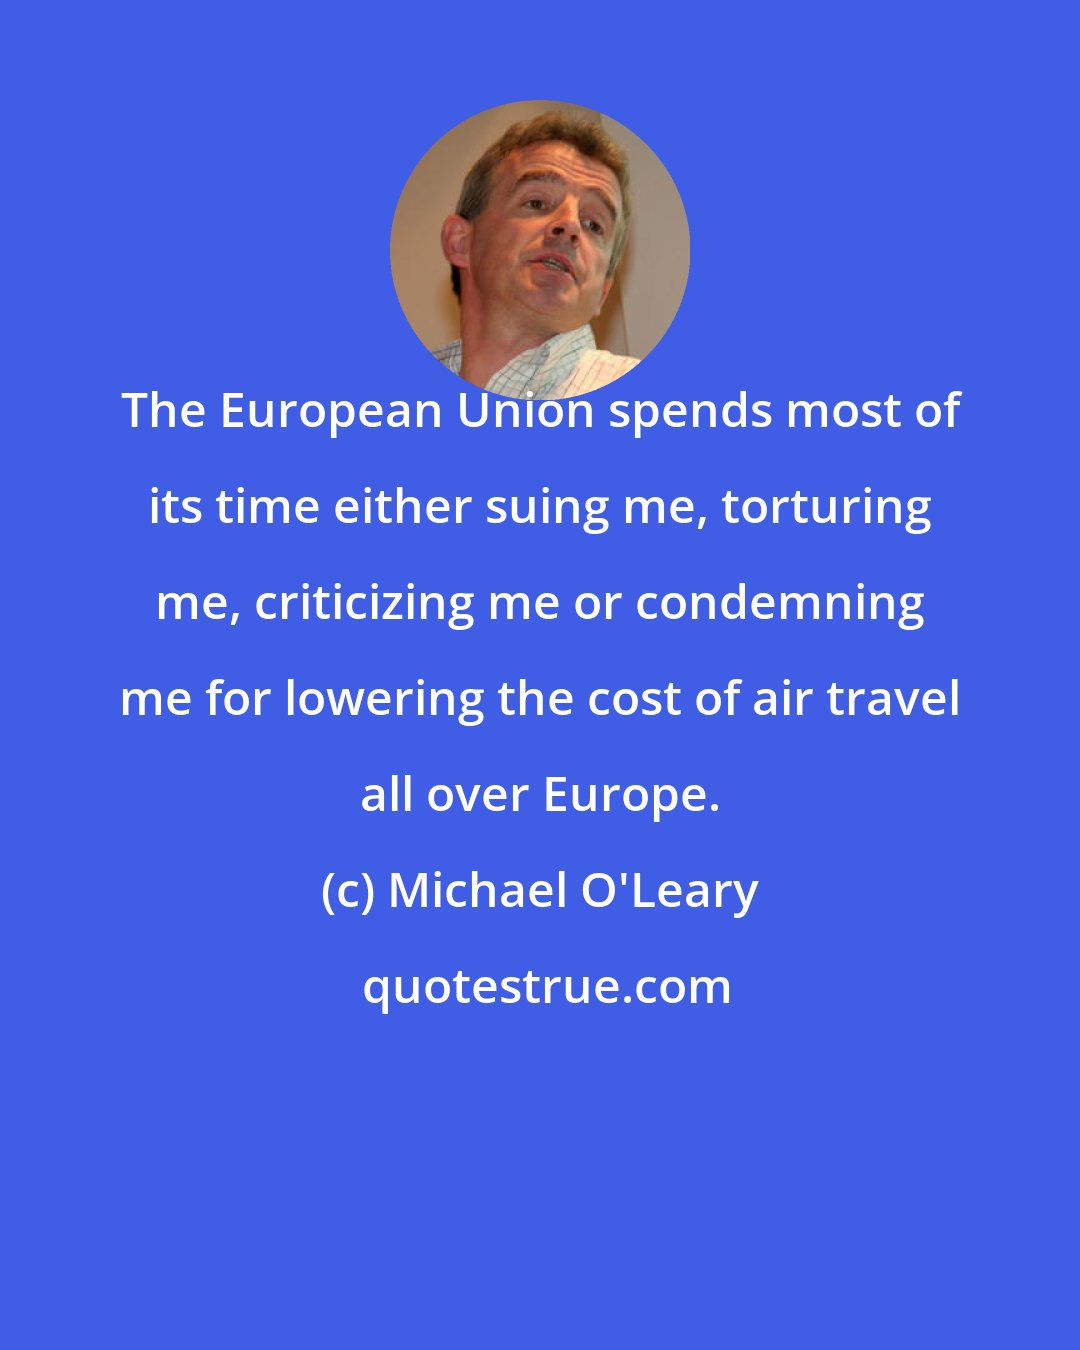 Michael O'Leary: The European Union spends most of its time either suing me, torturing me, criticizing me or condemning me for lowering the cost of air travel all over Europe.